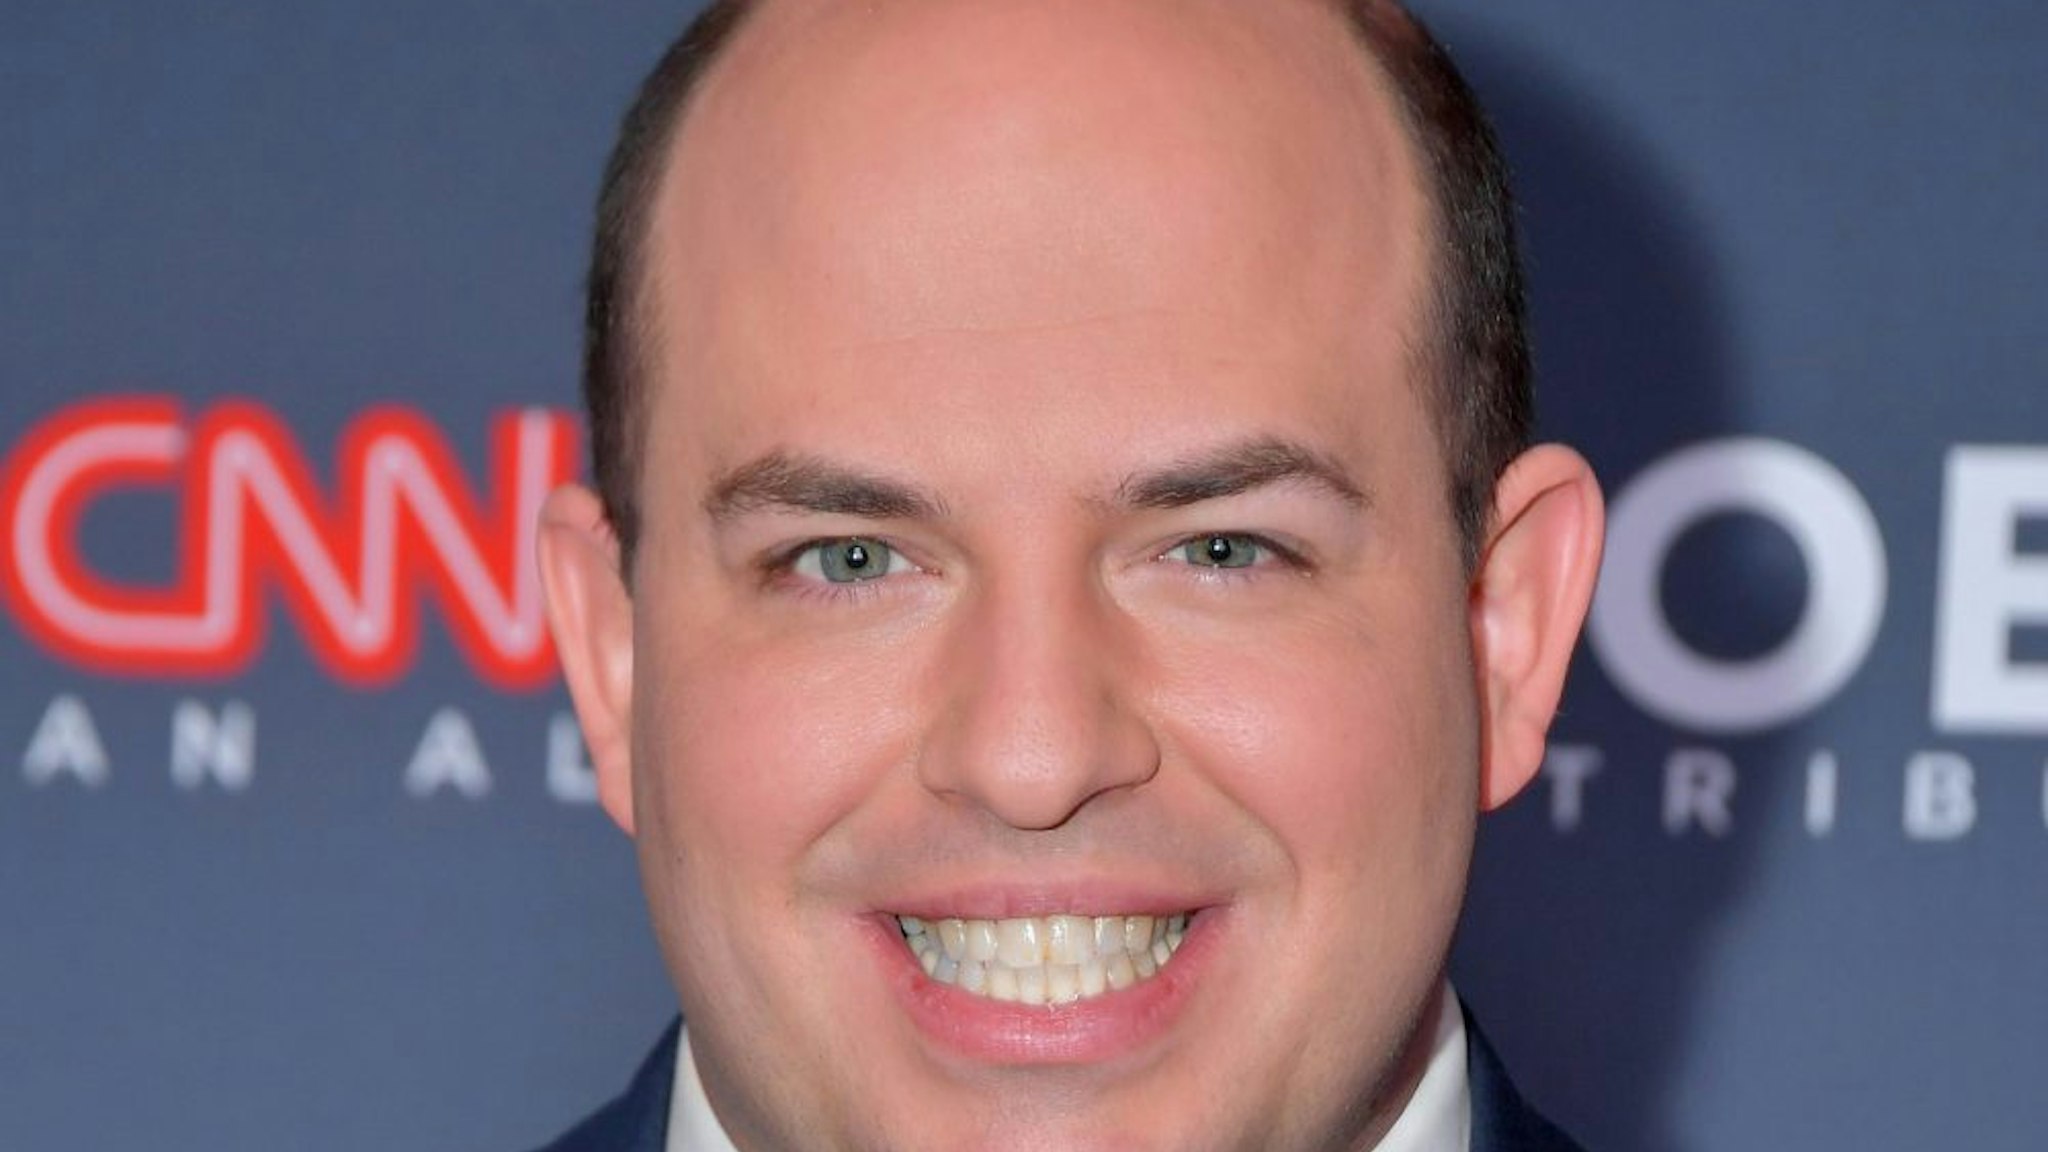 NEW YORK, NEW YORK - DECEMBER 08: Brian Stelter attends CNN Heroes at American Museum of Natural History on December 08, 2019 in New York City.